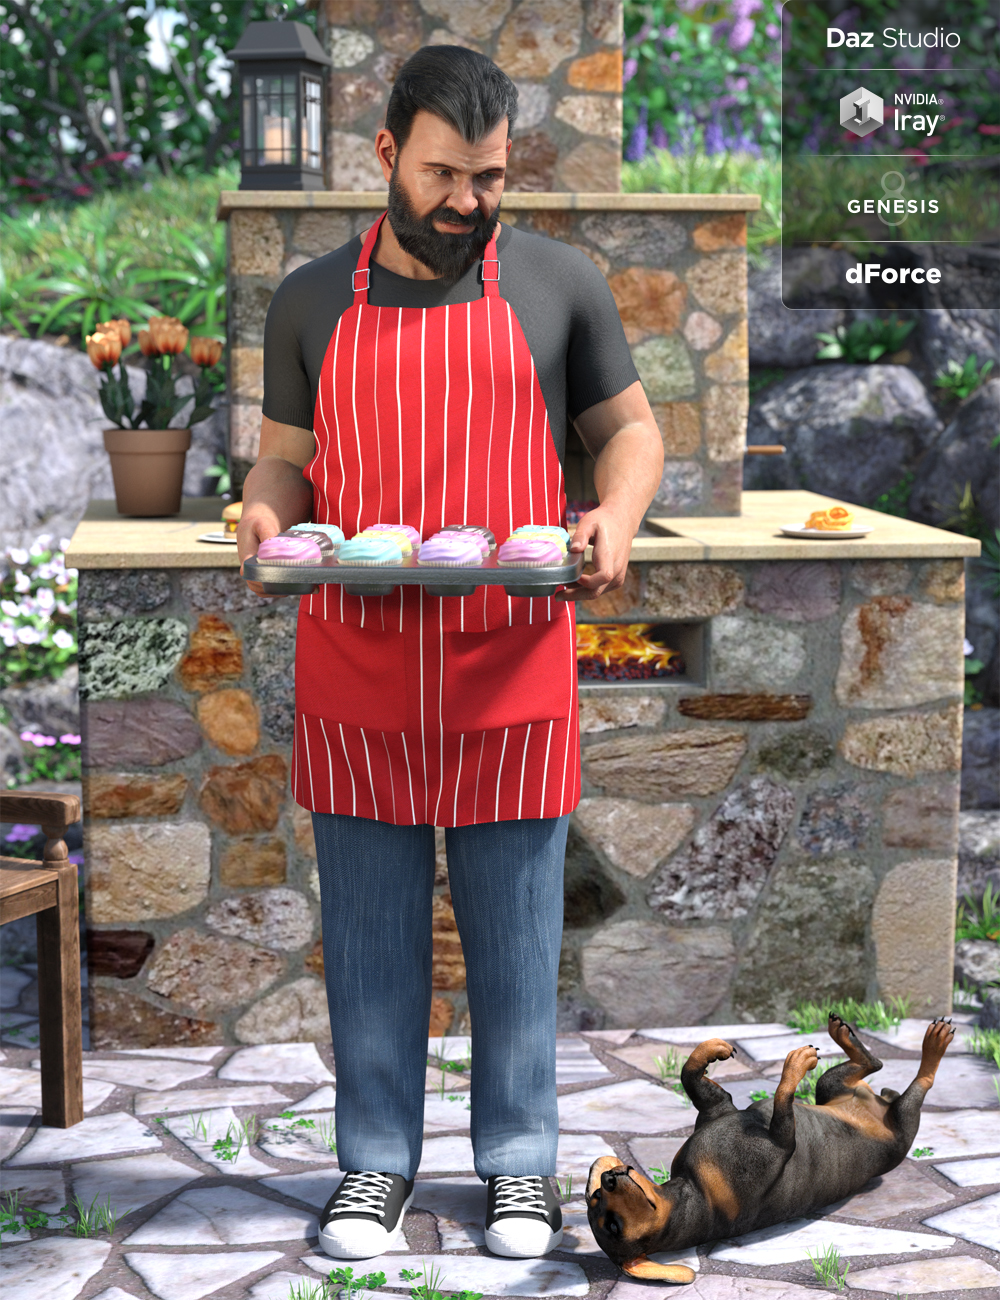 dForce Backyard BBQ Outfit Textures by: Moonscape GraphicsSade, 3D Models by Daz 3D